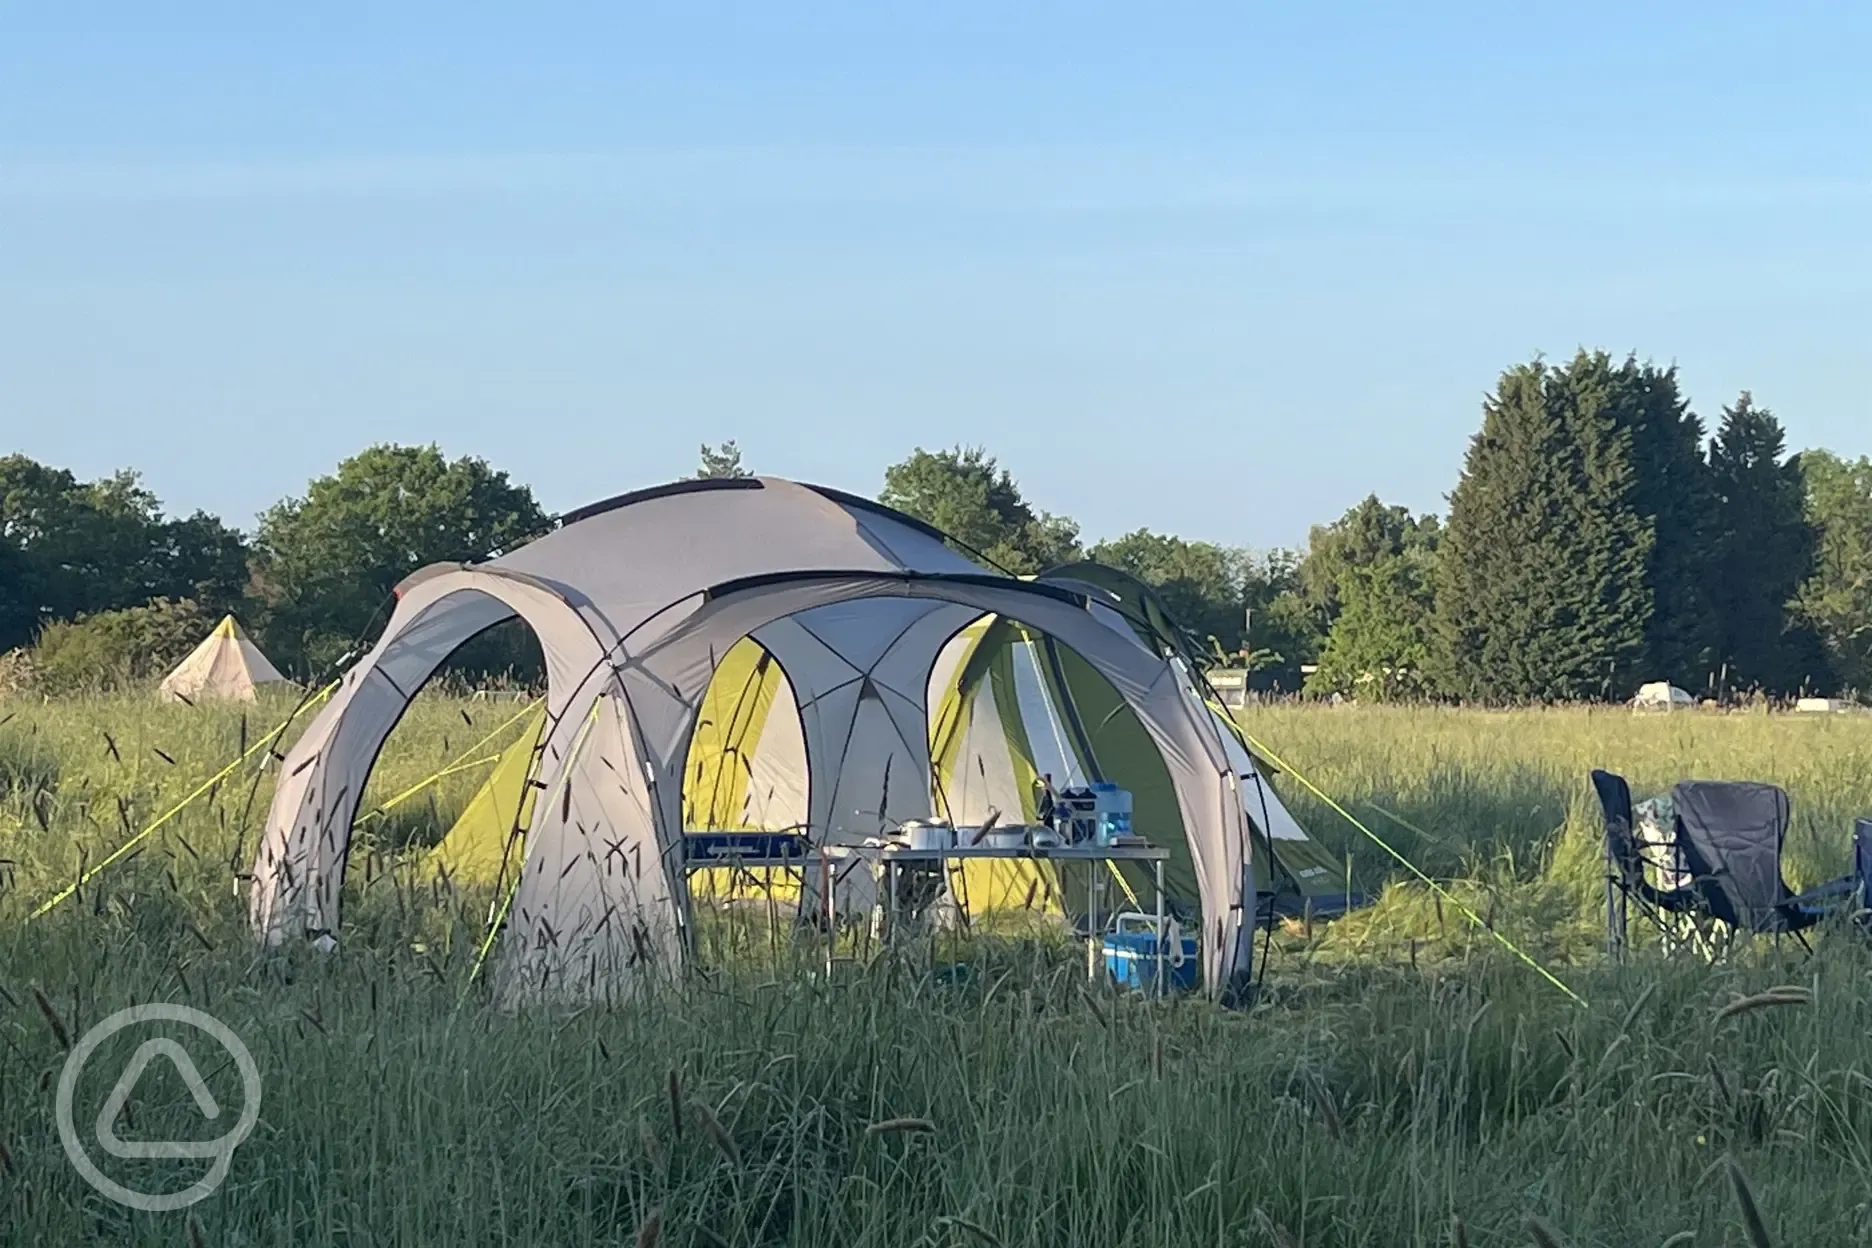 Non electric grass tent pitches with a gazebo